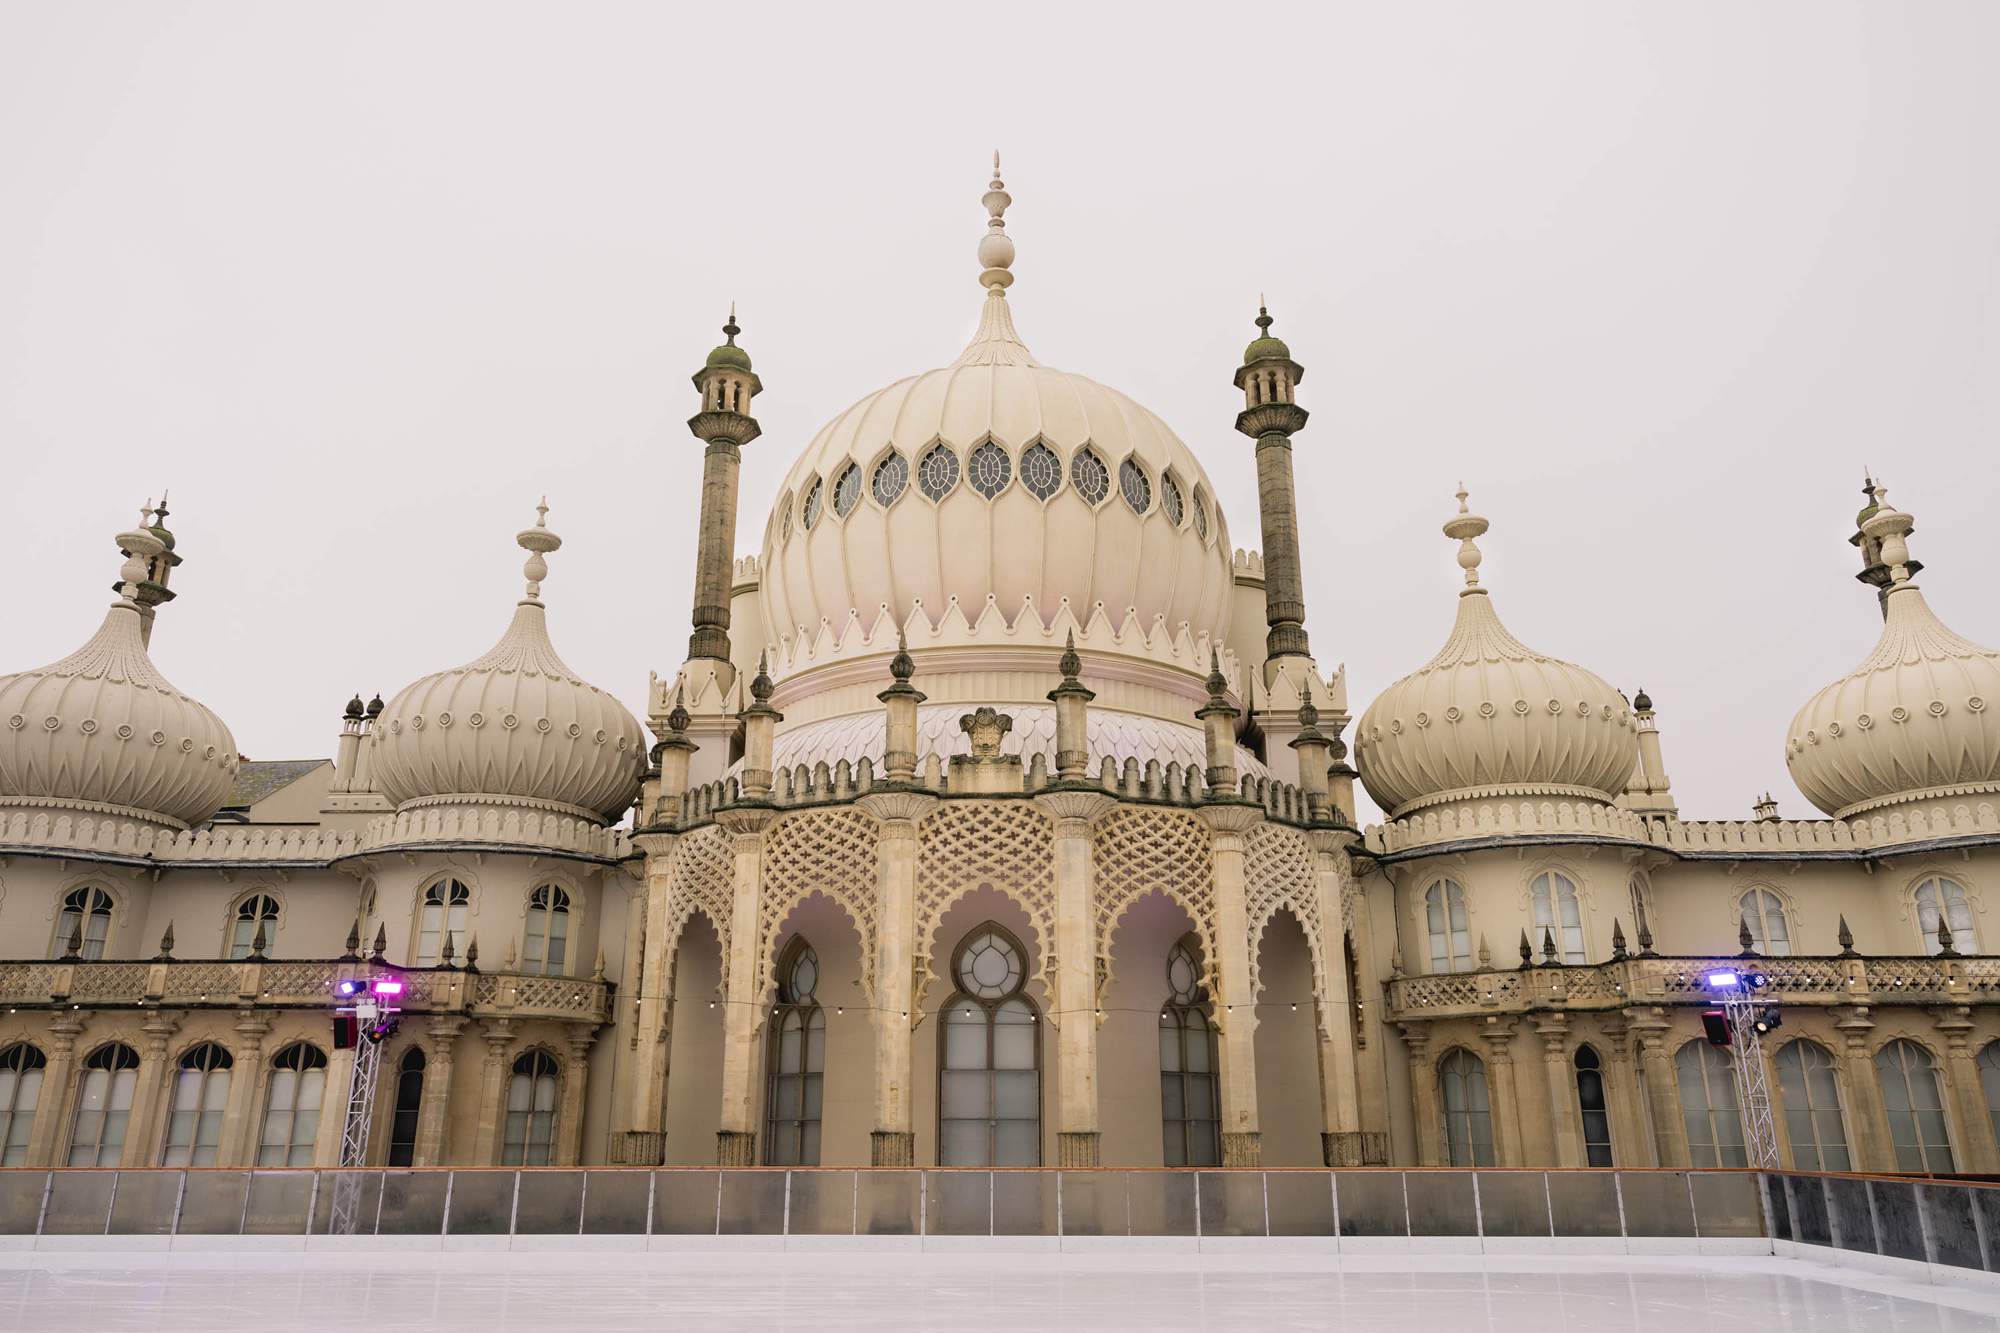 Brighton Royal Pavilion in East Sussex on a Winter's day.